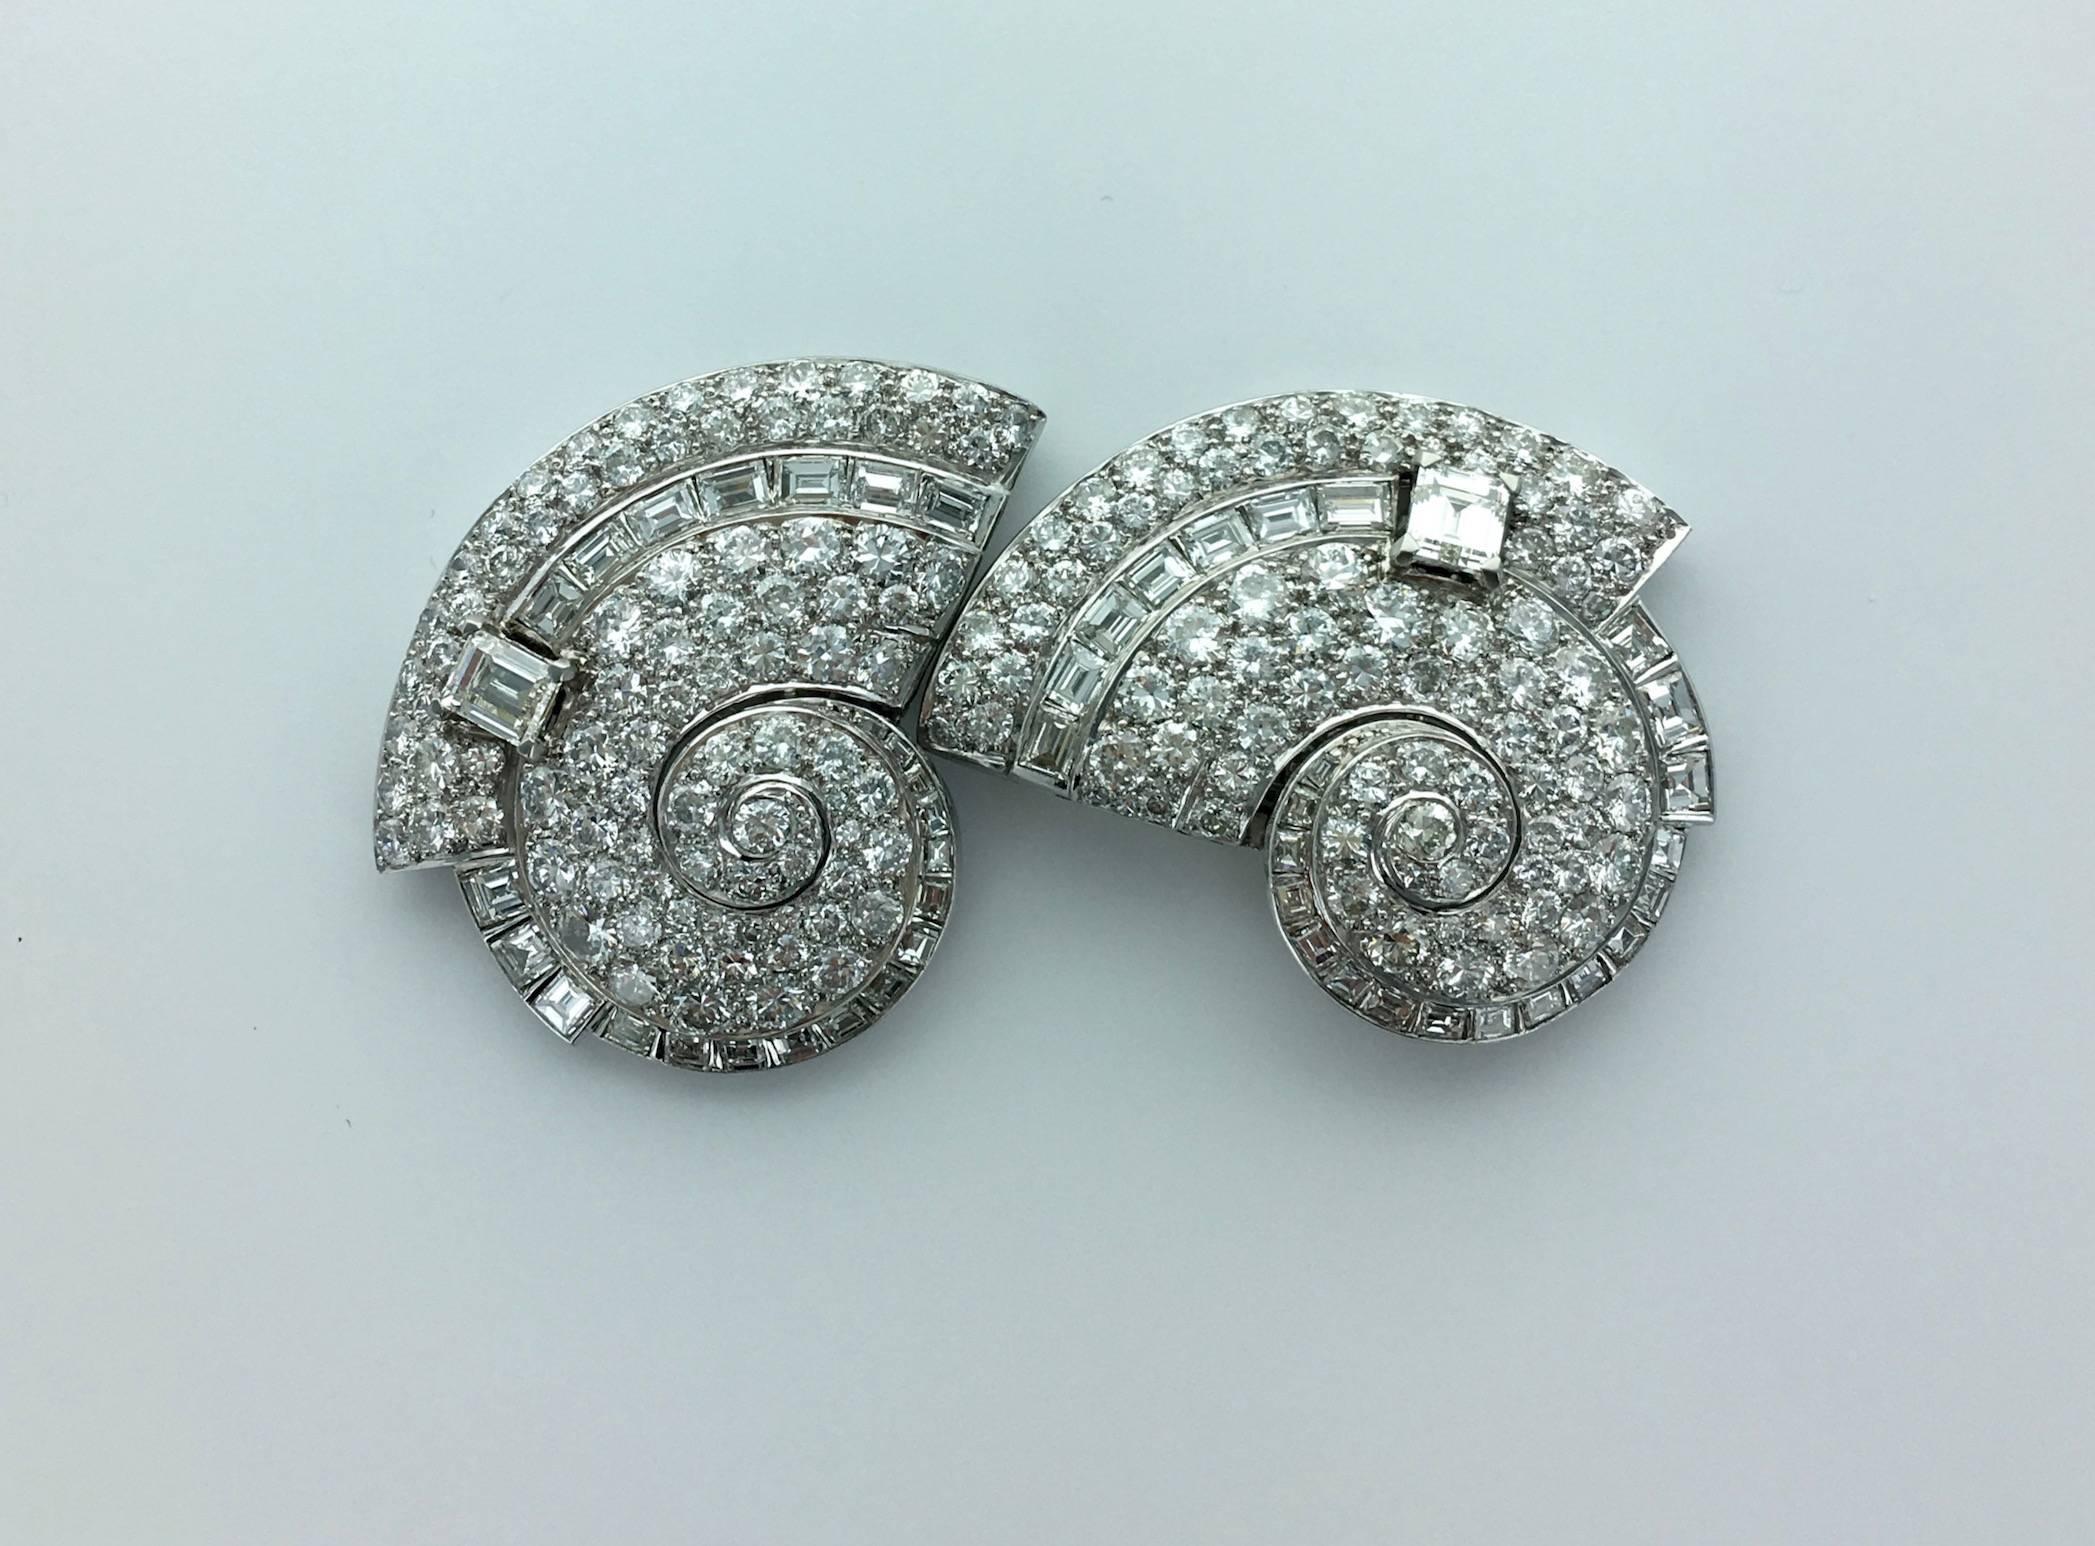 Unbelievable design probably realized by a major artist jeweler in the 1930s. This Avant-garde Art Deco Double Clip Brooch is as awesome worn in two pieces or in one gathered. All Diamond round, baguette and square cut pave on platinum.
French